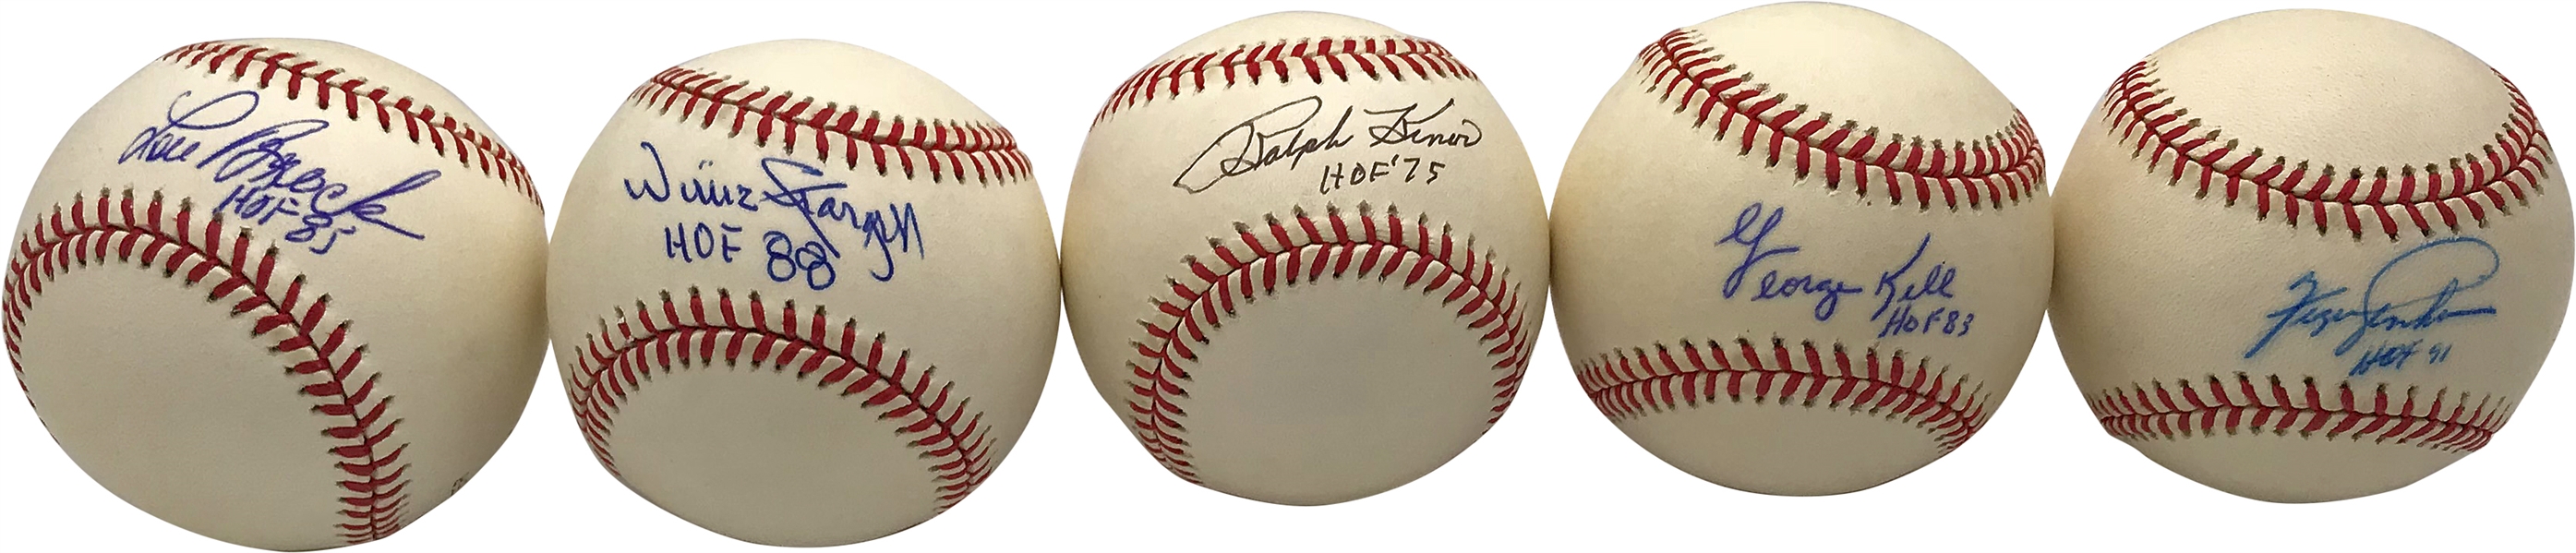 Lot of Ten (10) Signed & Hall of Fame Inscribed Baseballs w/ Stargell, Brock, Killebrew & Others! (Beckett/BAS Guaranteed)